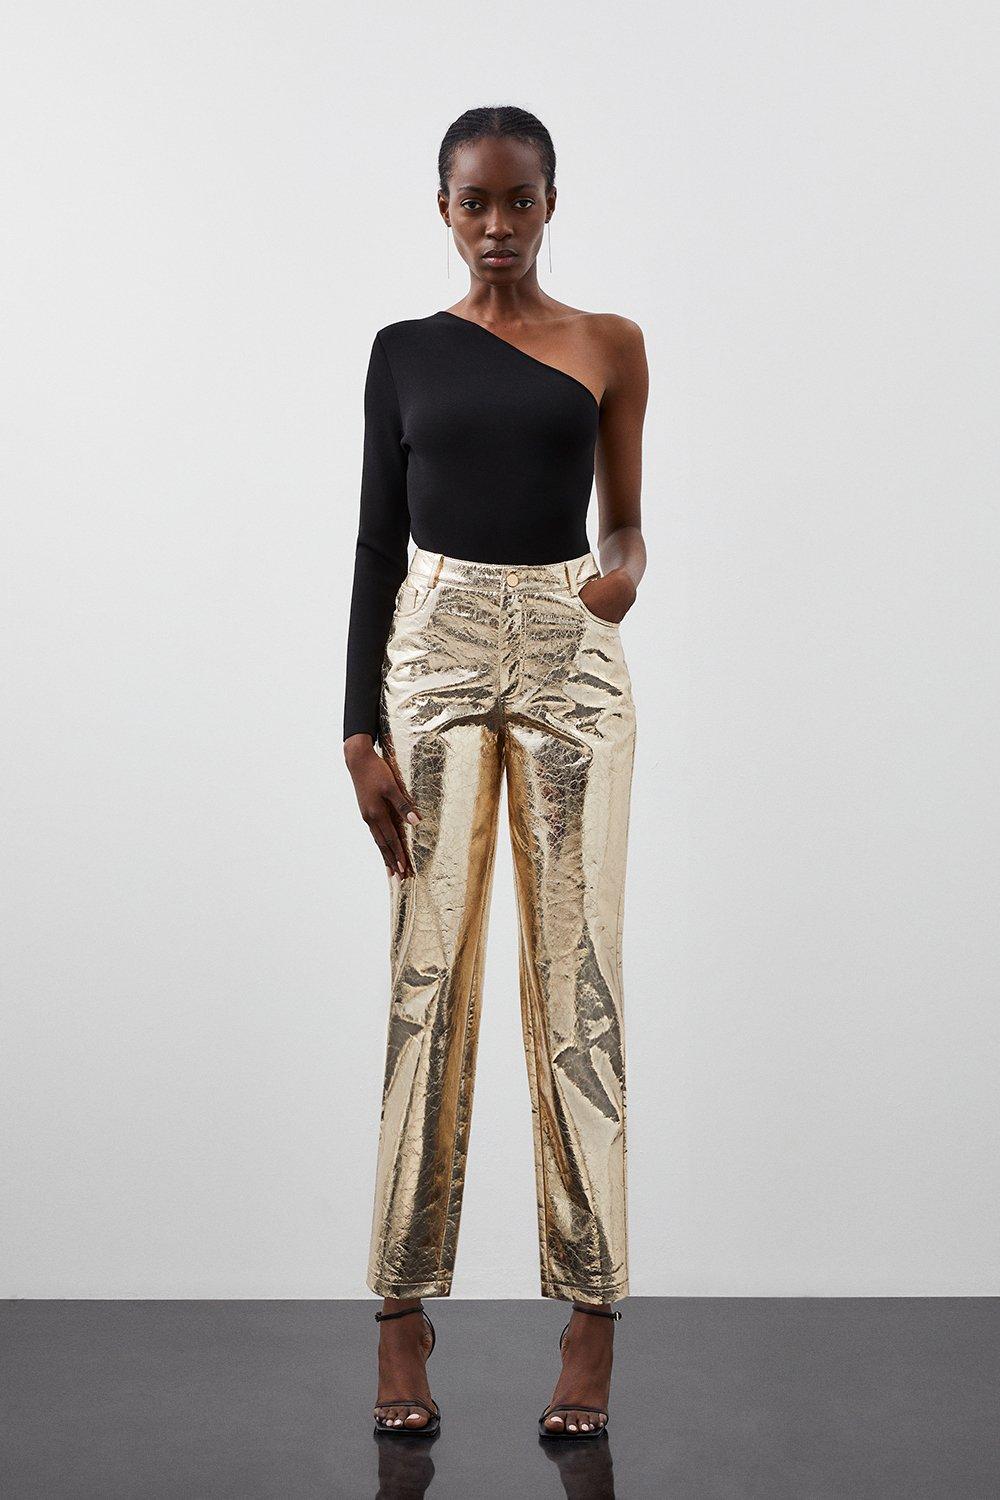 Milly Women's Rue Faux Leather Pants - Silver - Size 24